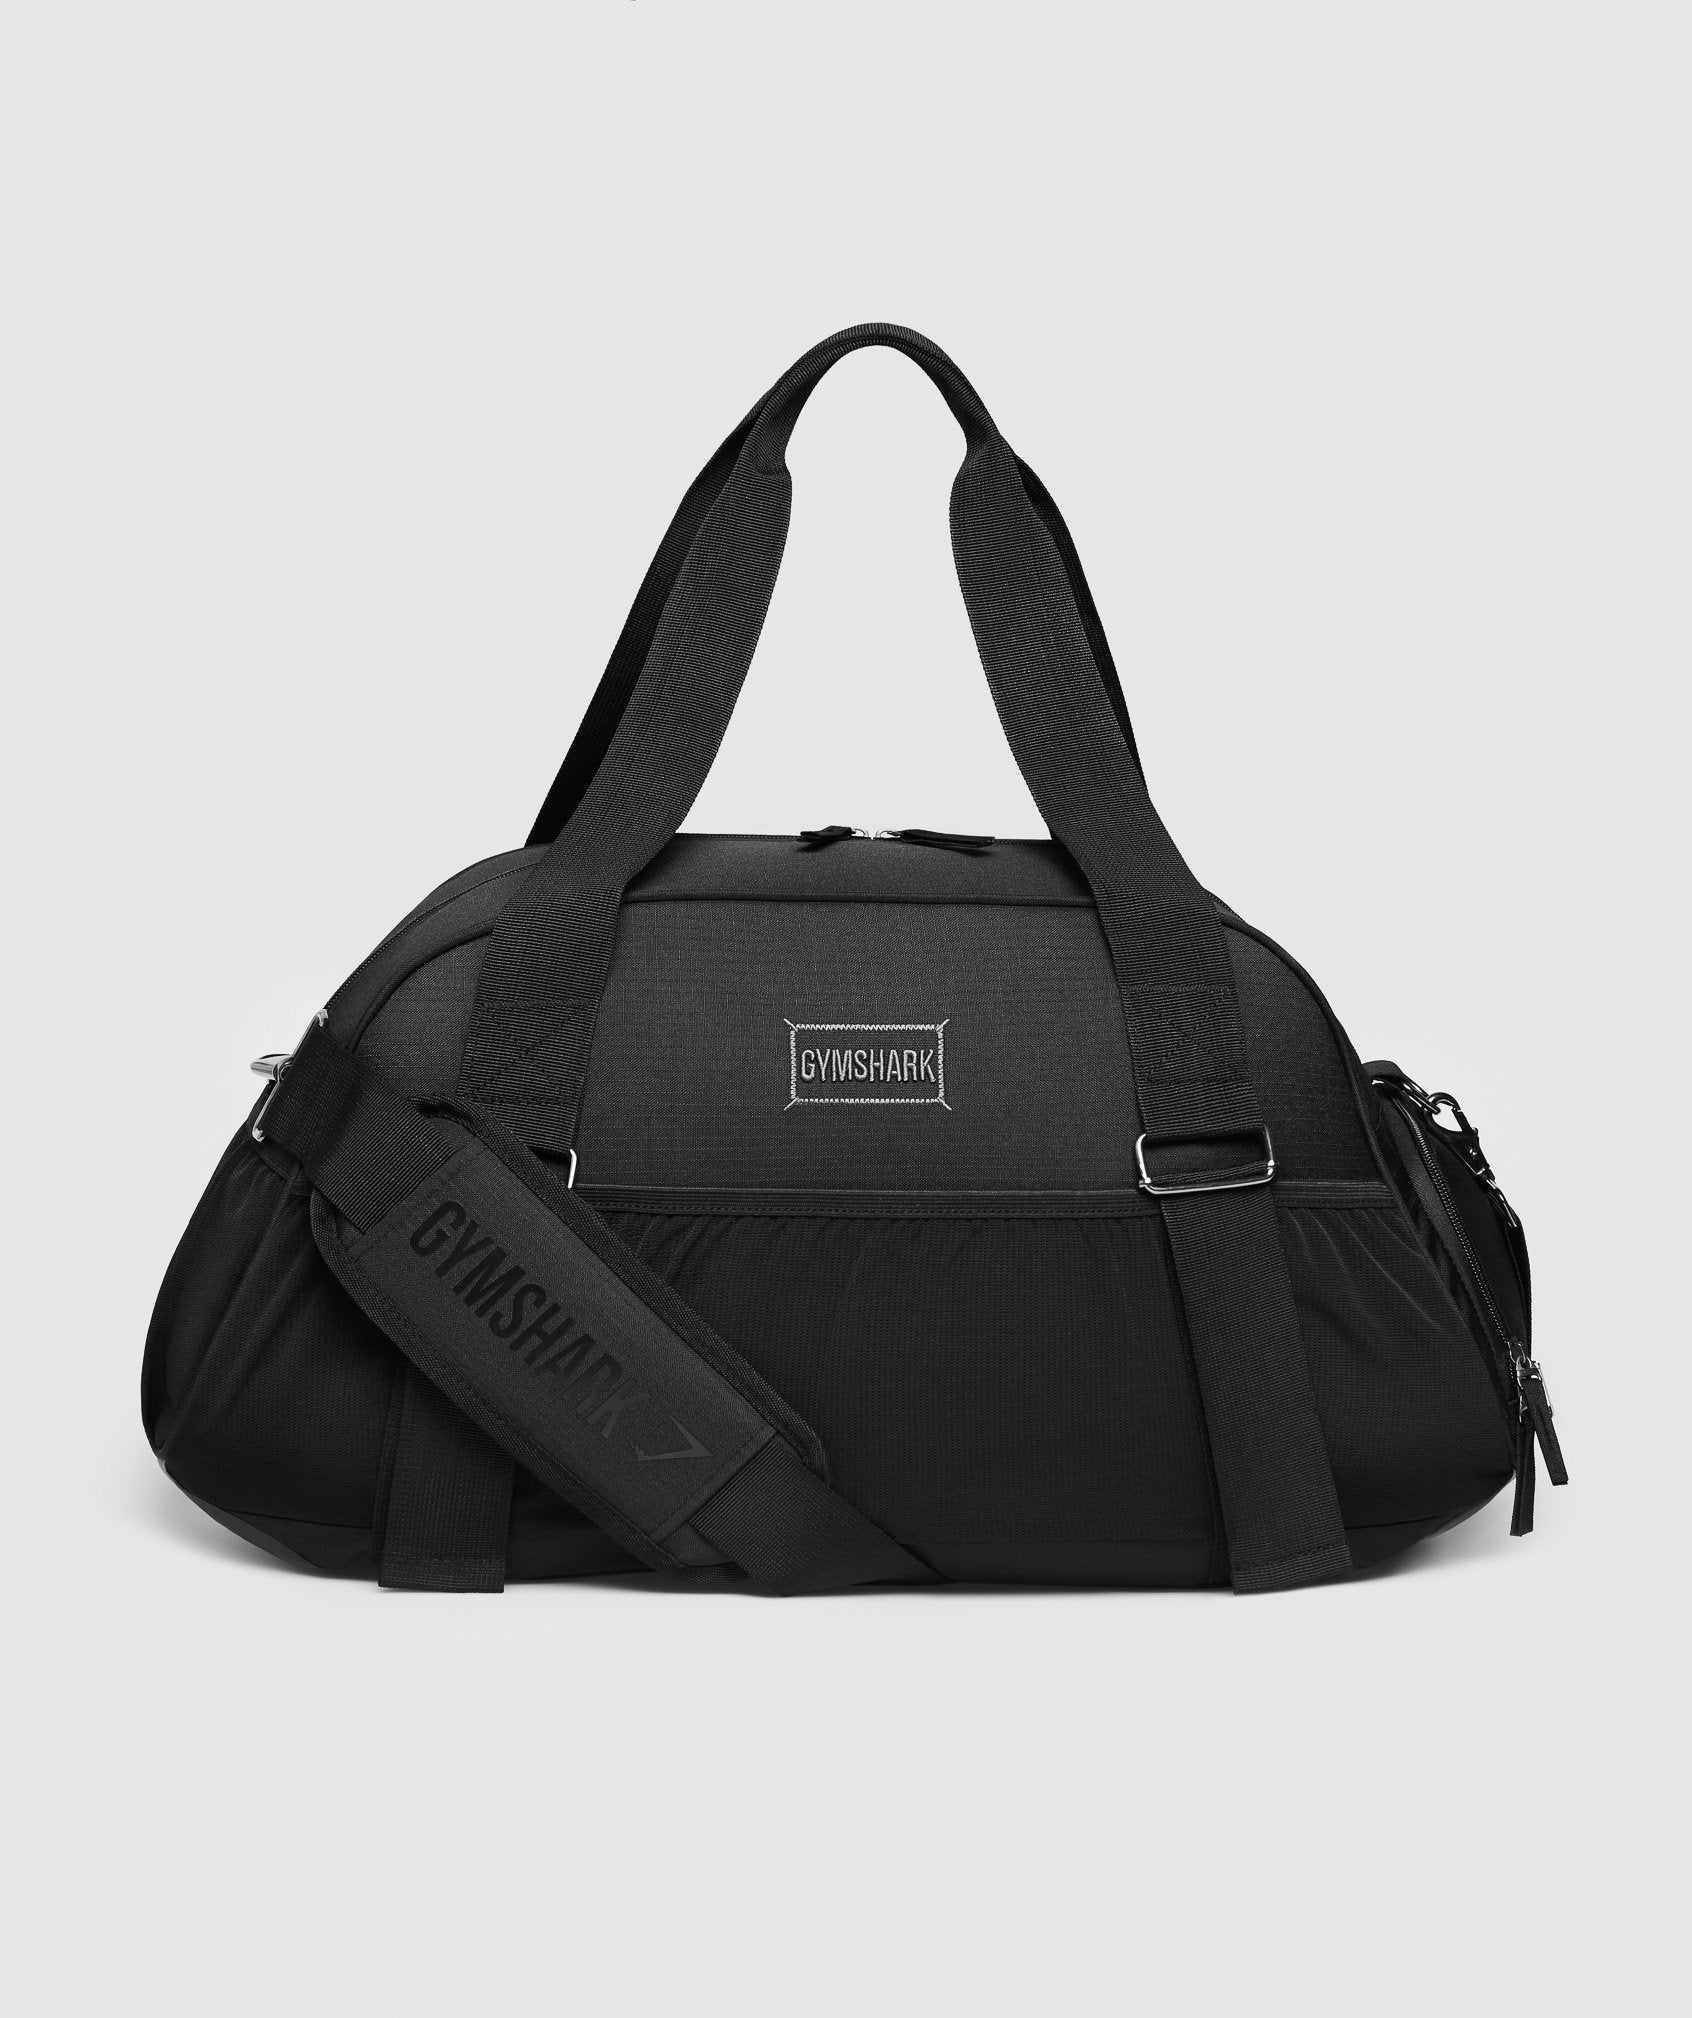 Lifestyle Gym Bag in Black - view 4